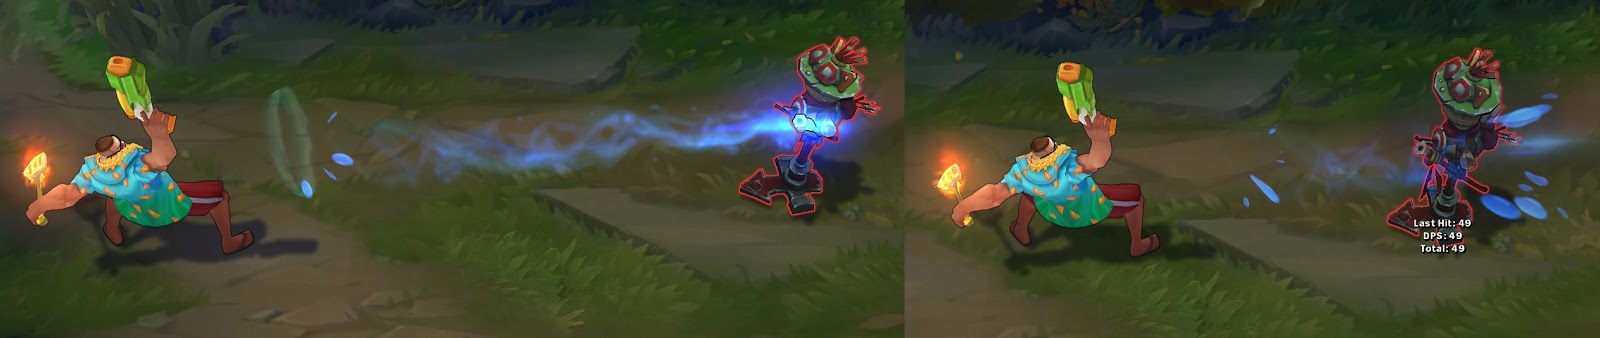 pool party gangplank skin spell animation